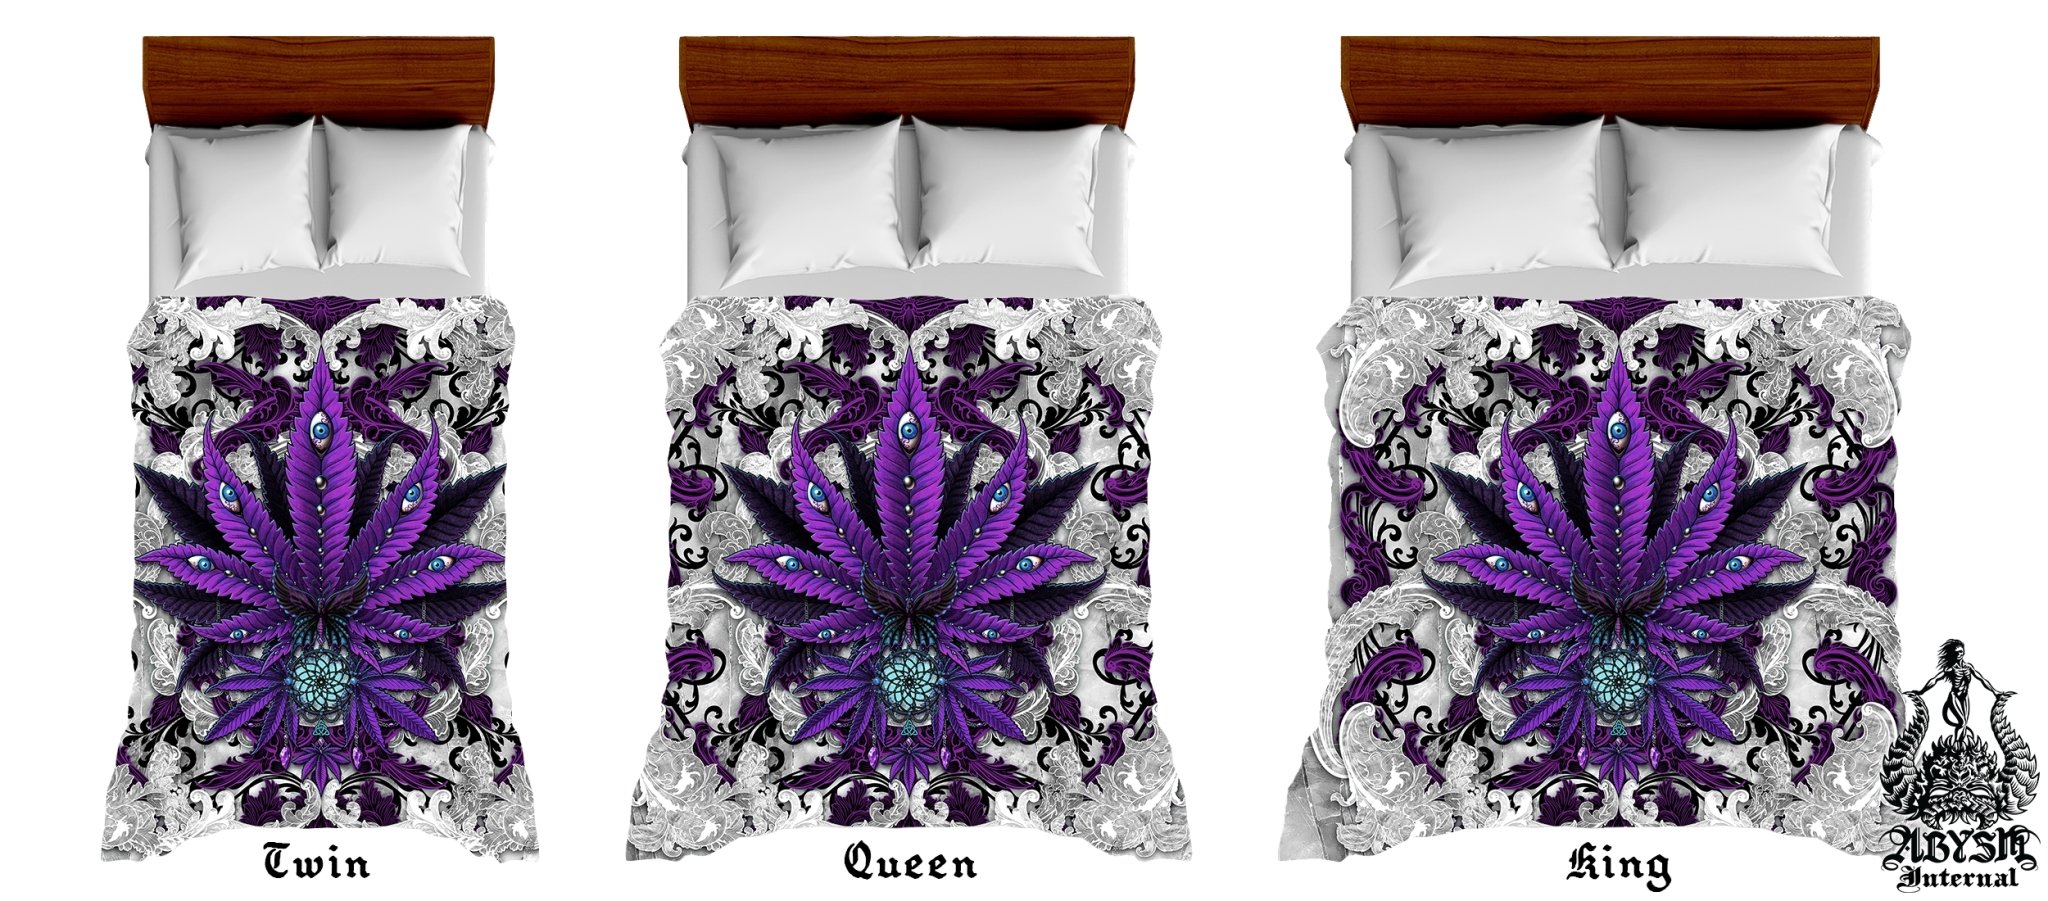 Weed Bedding Set, Comforter and Duvet, Cannabis Bed Cover, Marijuana Bedroom Decor, King, Queen and Twin Size, 420 Room Art - Purple White Goth - Abysm Internal